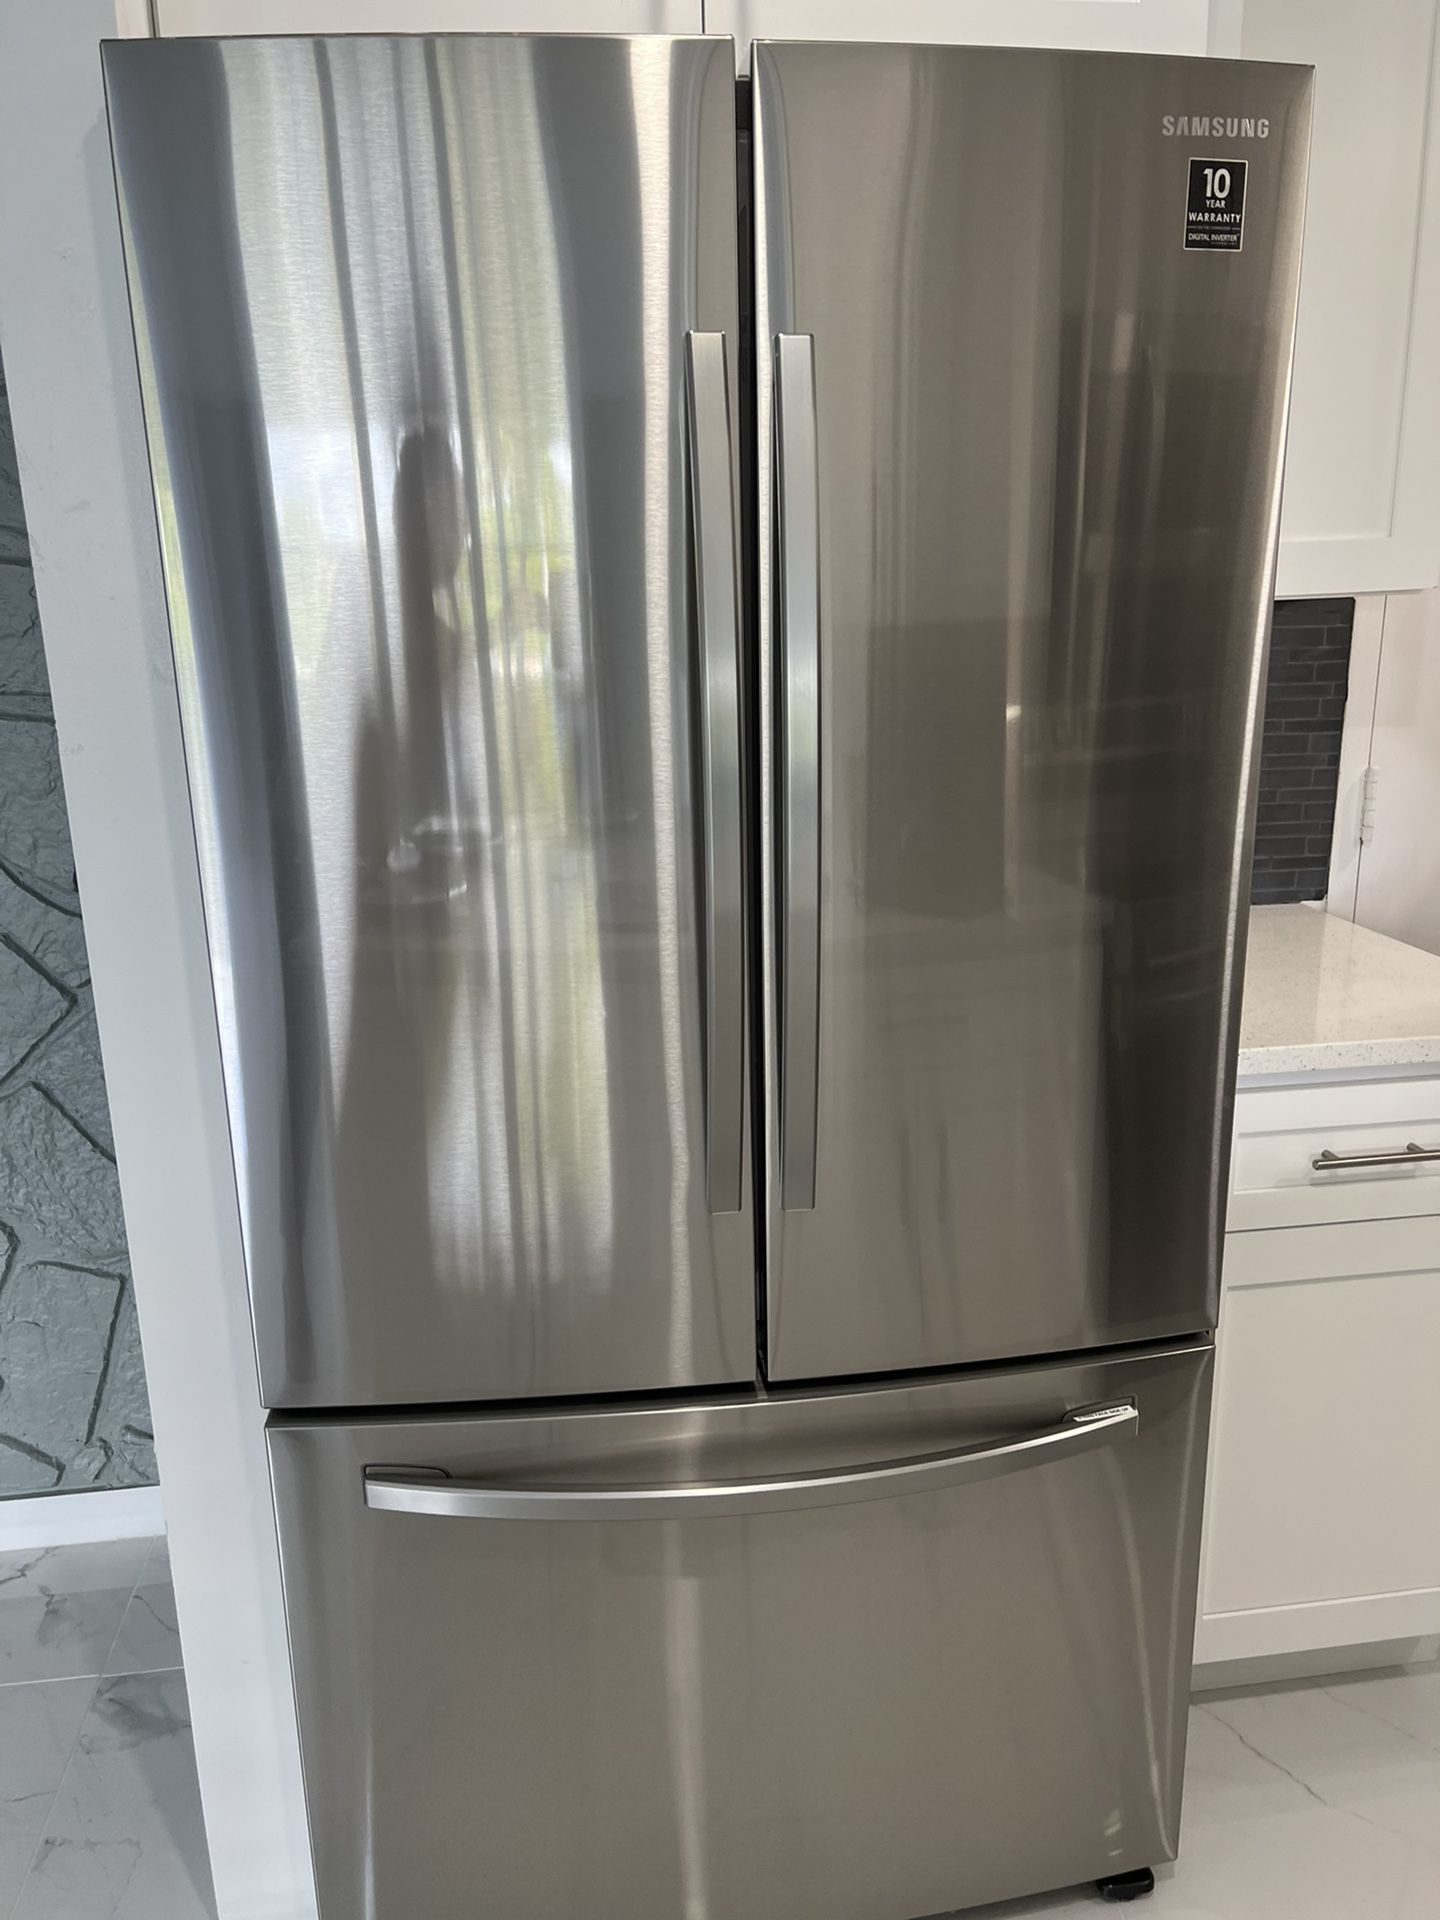 Brand New samsung Full Size Refrigerator     Selling For Less Than Half Price   